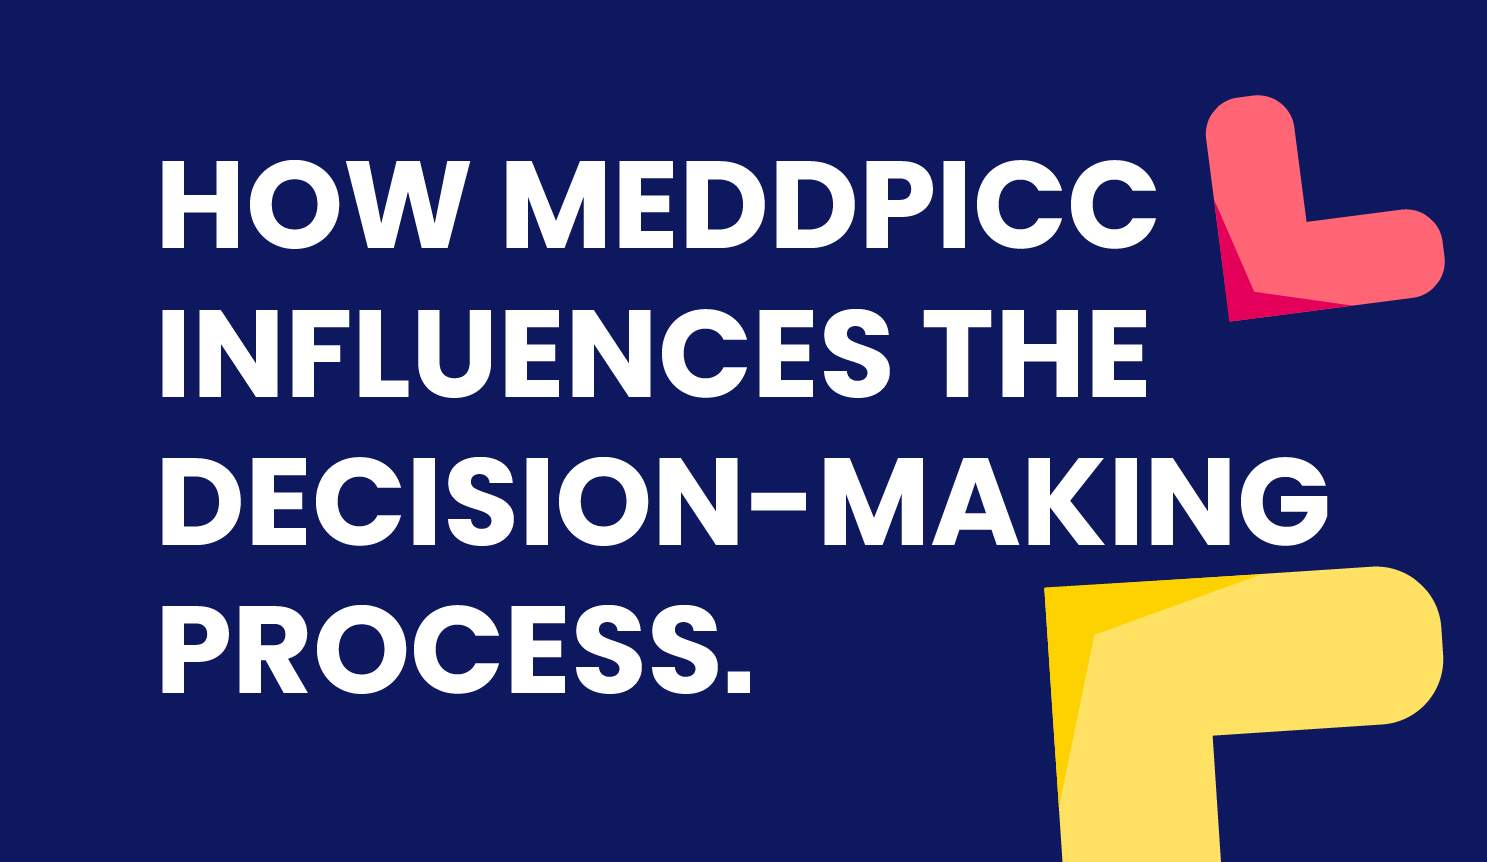 How MEDDPICC Influences the Decision-Making Process